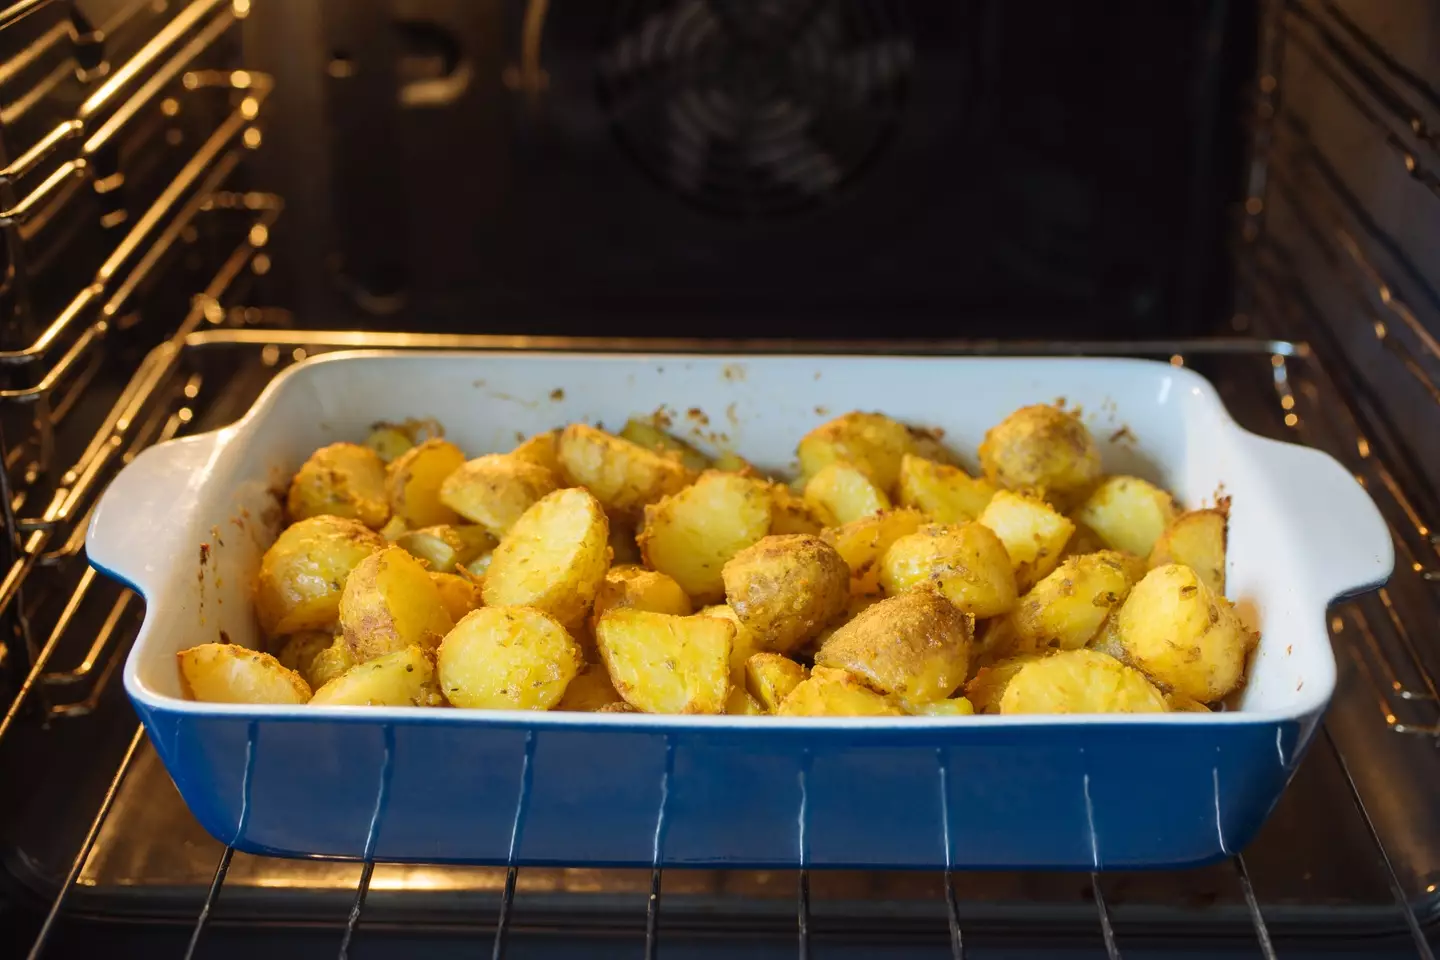 Make sure you have an empty oven for your roast potatoes (